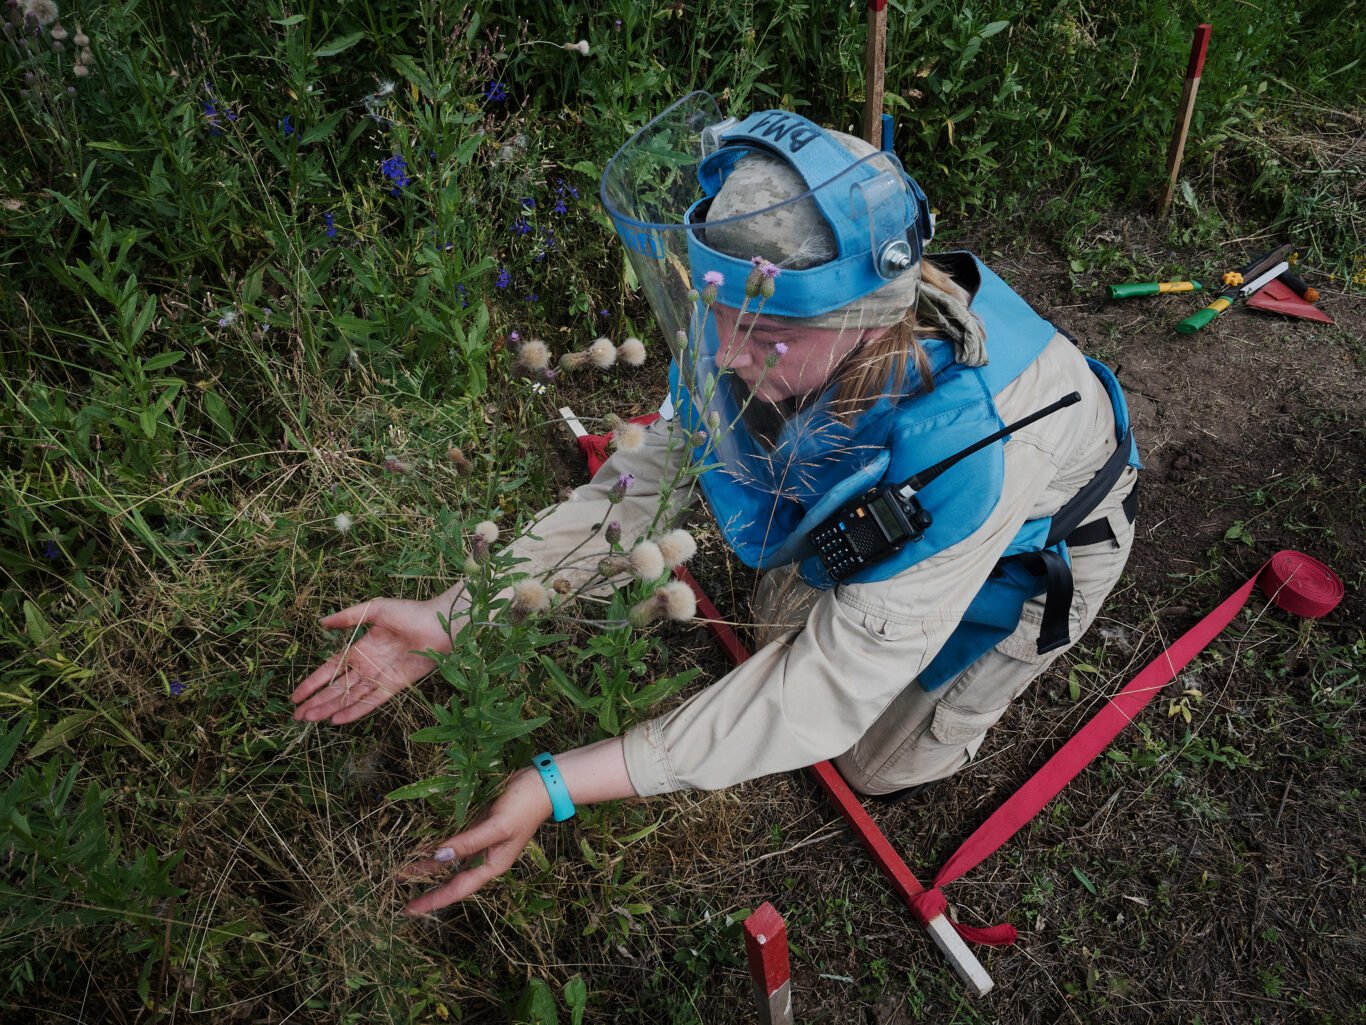 A woman volunteer of Danish Demining Group (DDG) is wears protective suit and inspects landmines in Donbas, Ukraine.